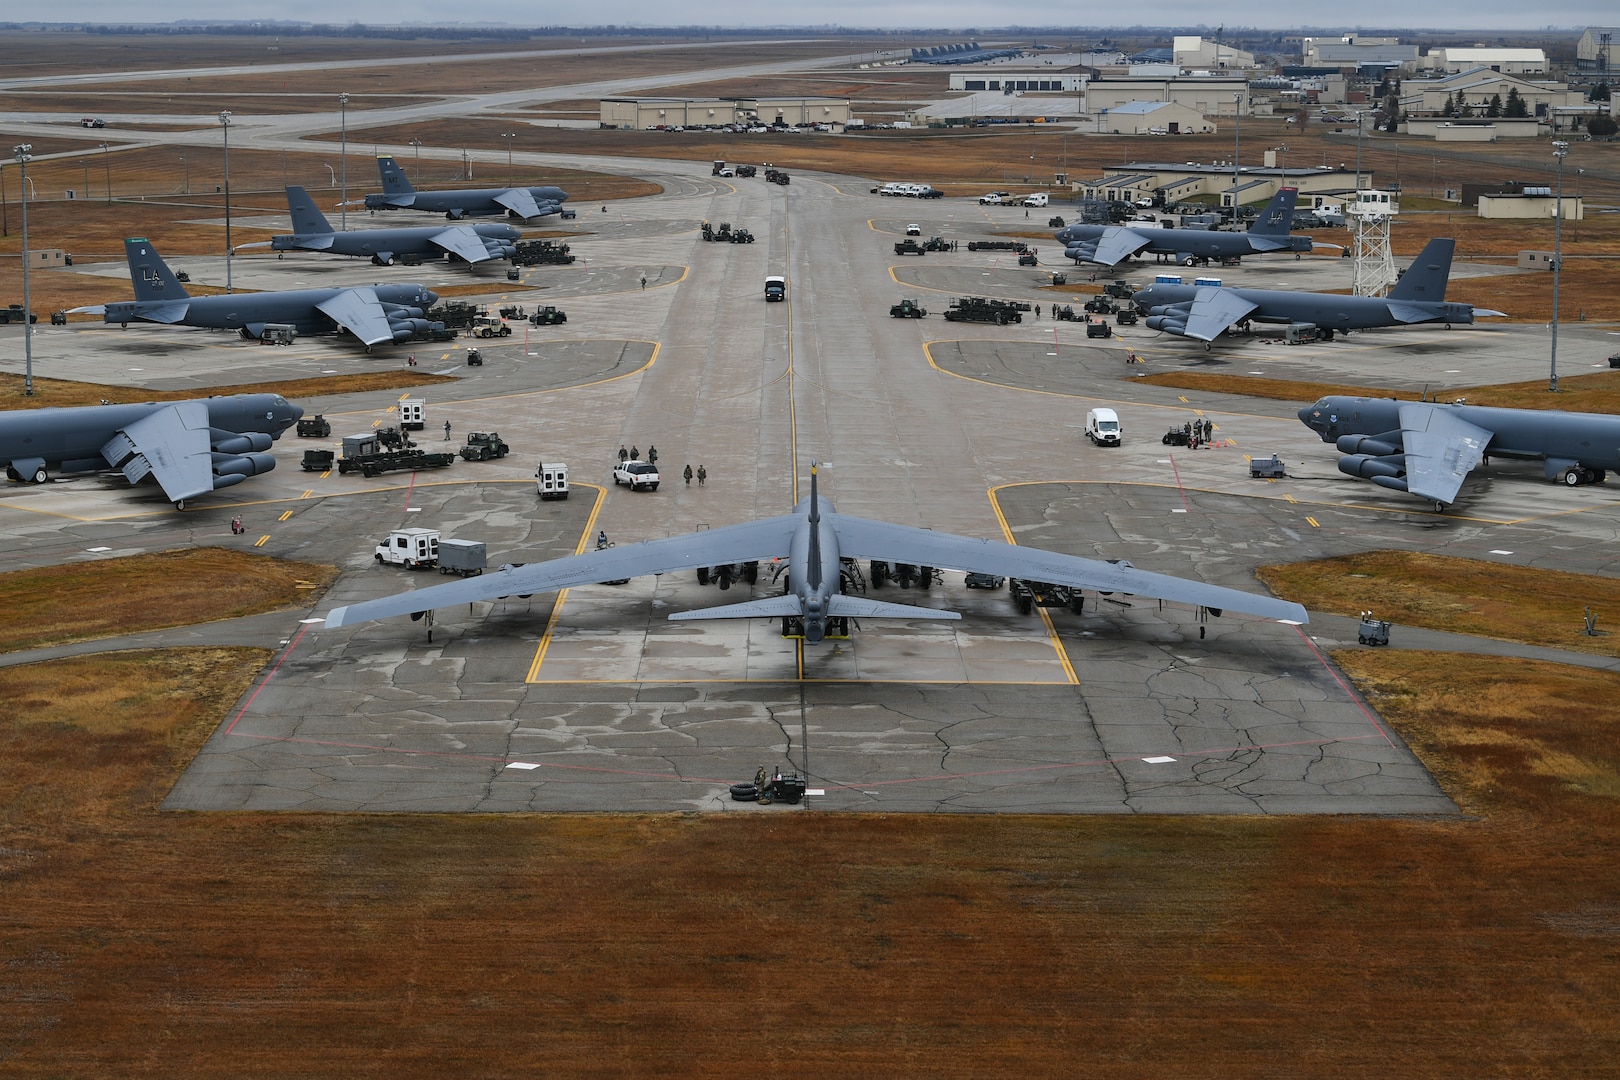 Airmen ready B-52H Stratofortresses during Global Thunder 19 at Minot Air Force Base, N.D., Nov. 2, 2018. Global Thunder is an exercise to test readiness and ensure a safe, secure, ready and reliable strategic deterrent force. The exercise provides training opportunities that assess all U.S. Strategic Command mission areas and joint and field training operational readiness, with a specific focus on nuclear readiness as well as providing unique training for assigned units and allies.